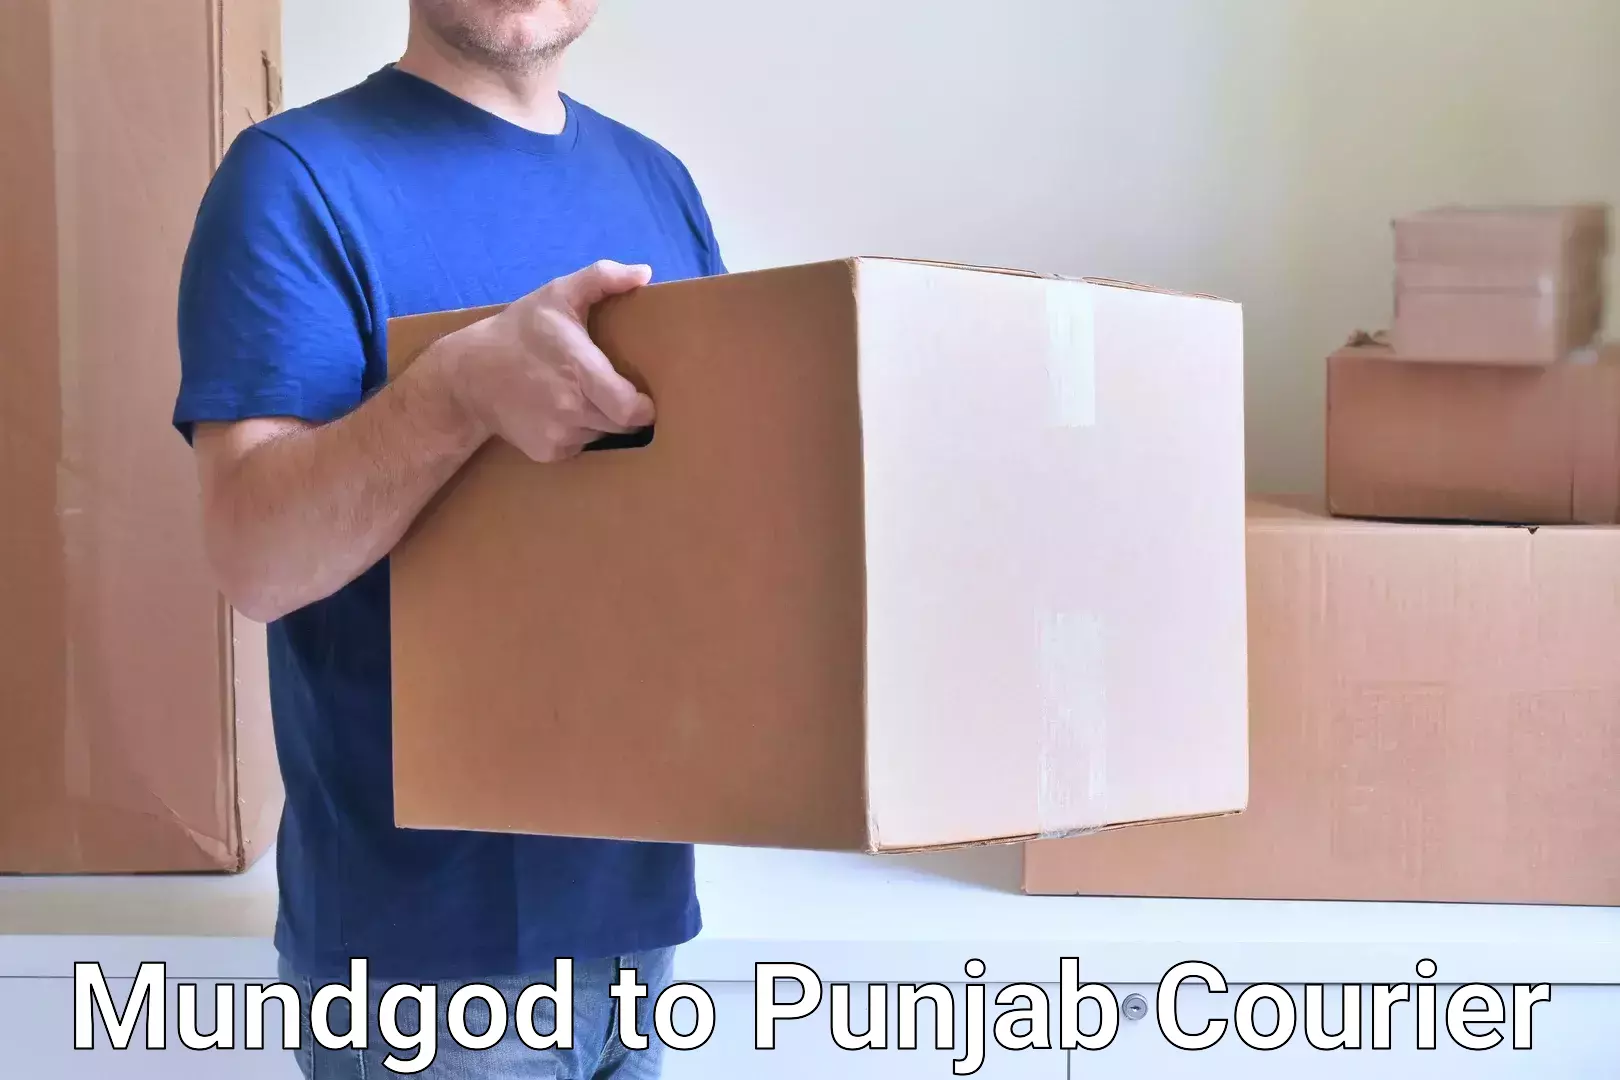 Sustainable courier practices Mundgod to Barnala